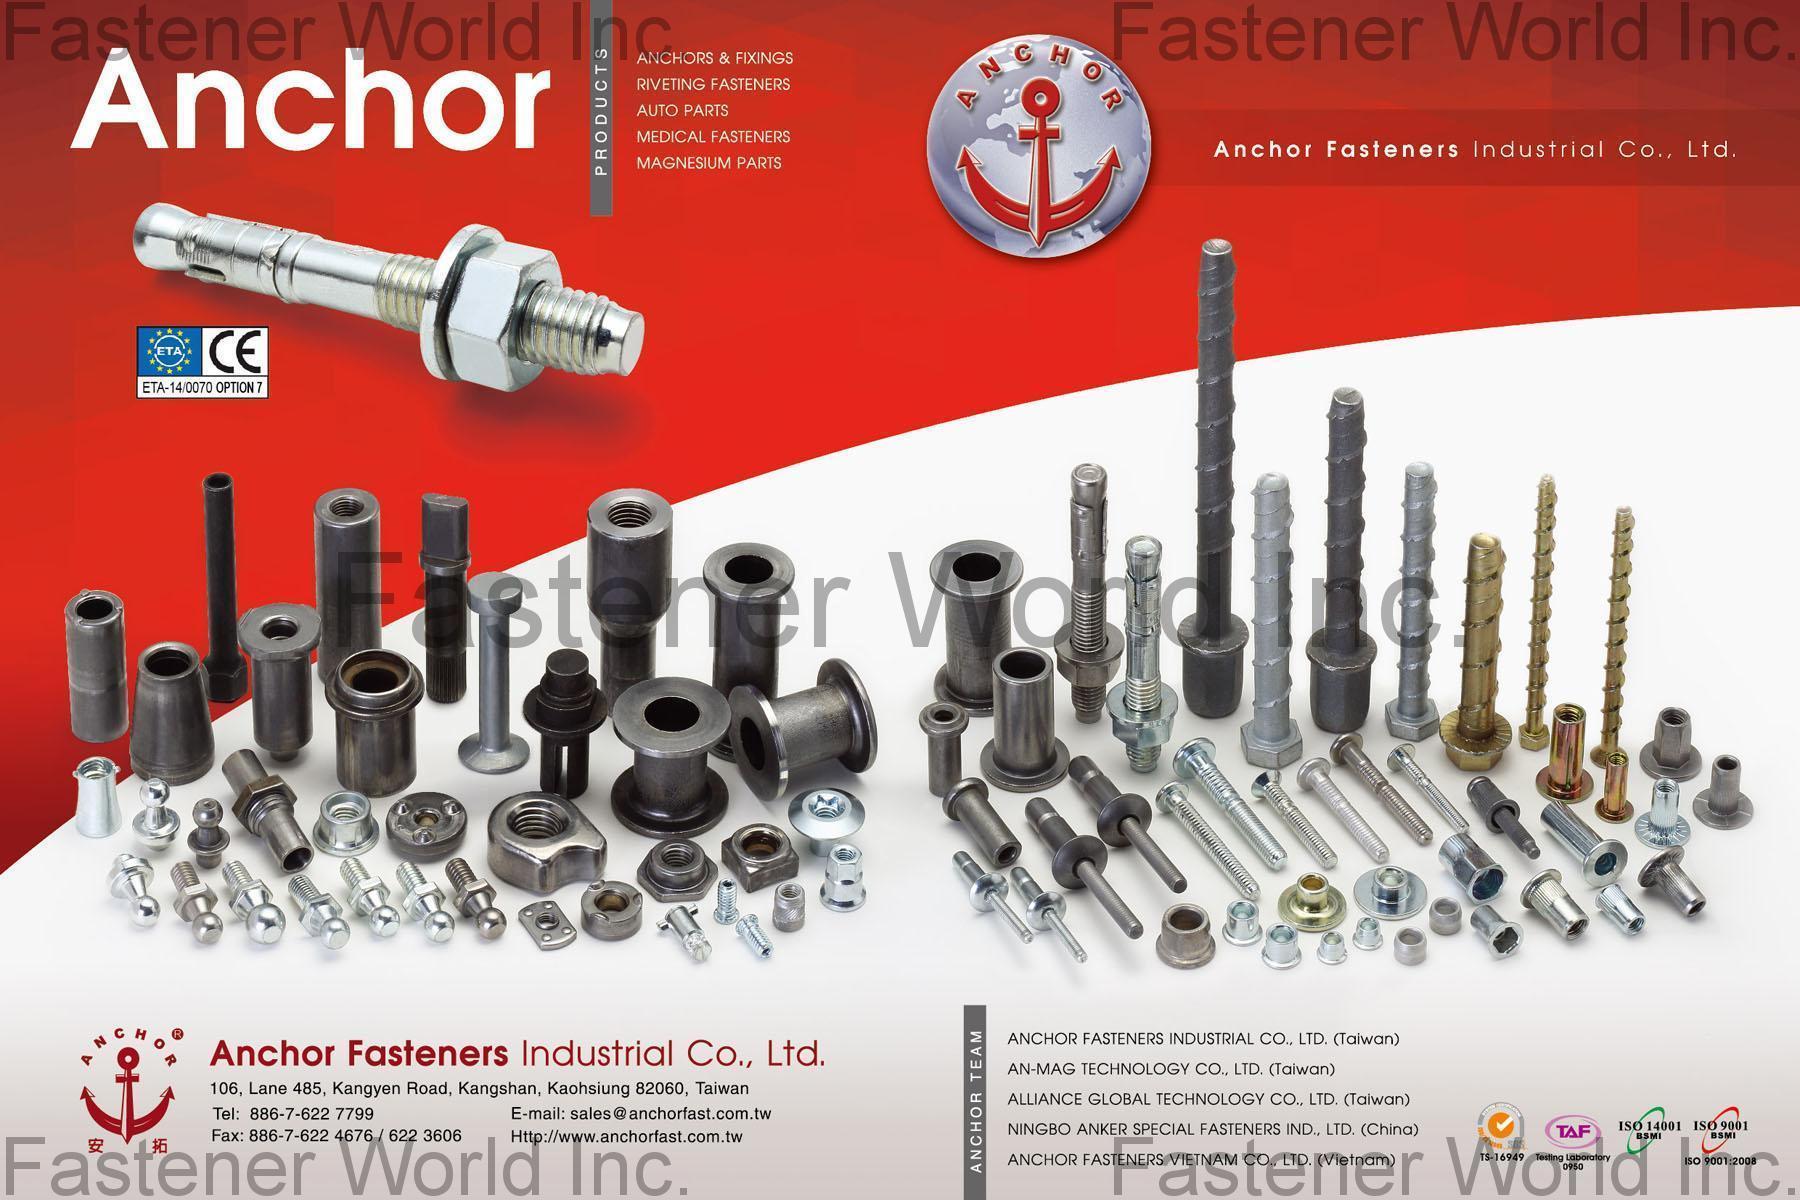 ANCHOR FASTENERS INDUSTRIAL CO., LTD.  , Anchors & Fixing, Riveting Fasteners, Auto Parts, Medical Fasteners, Magnesium Parts , Automotive Parts